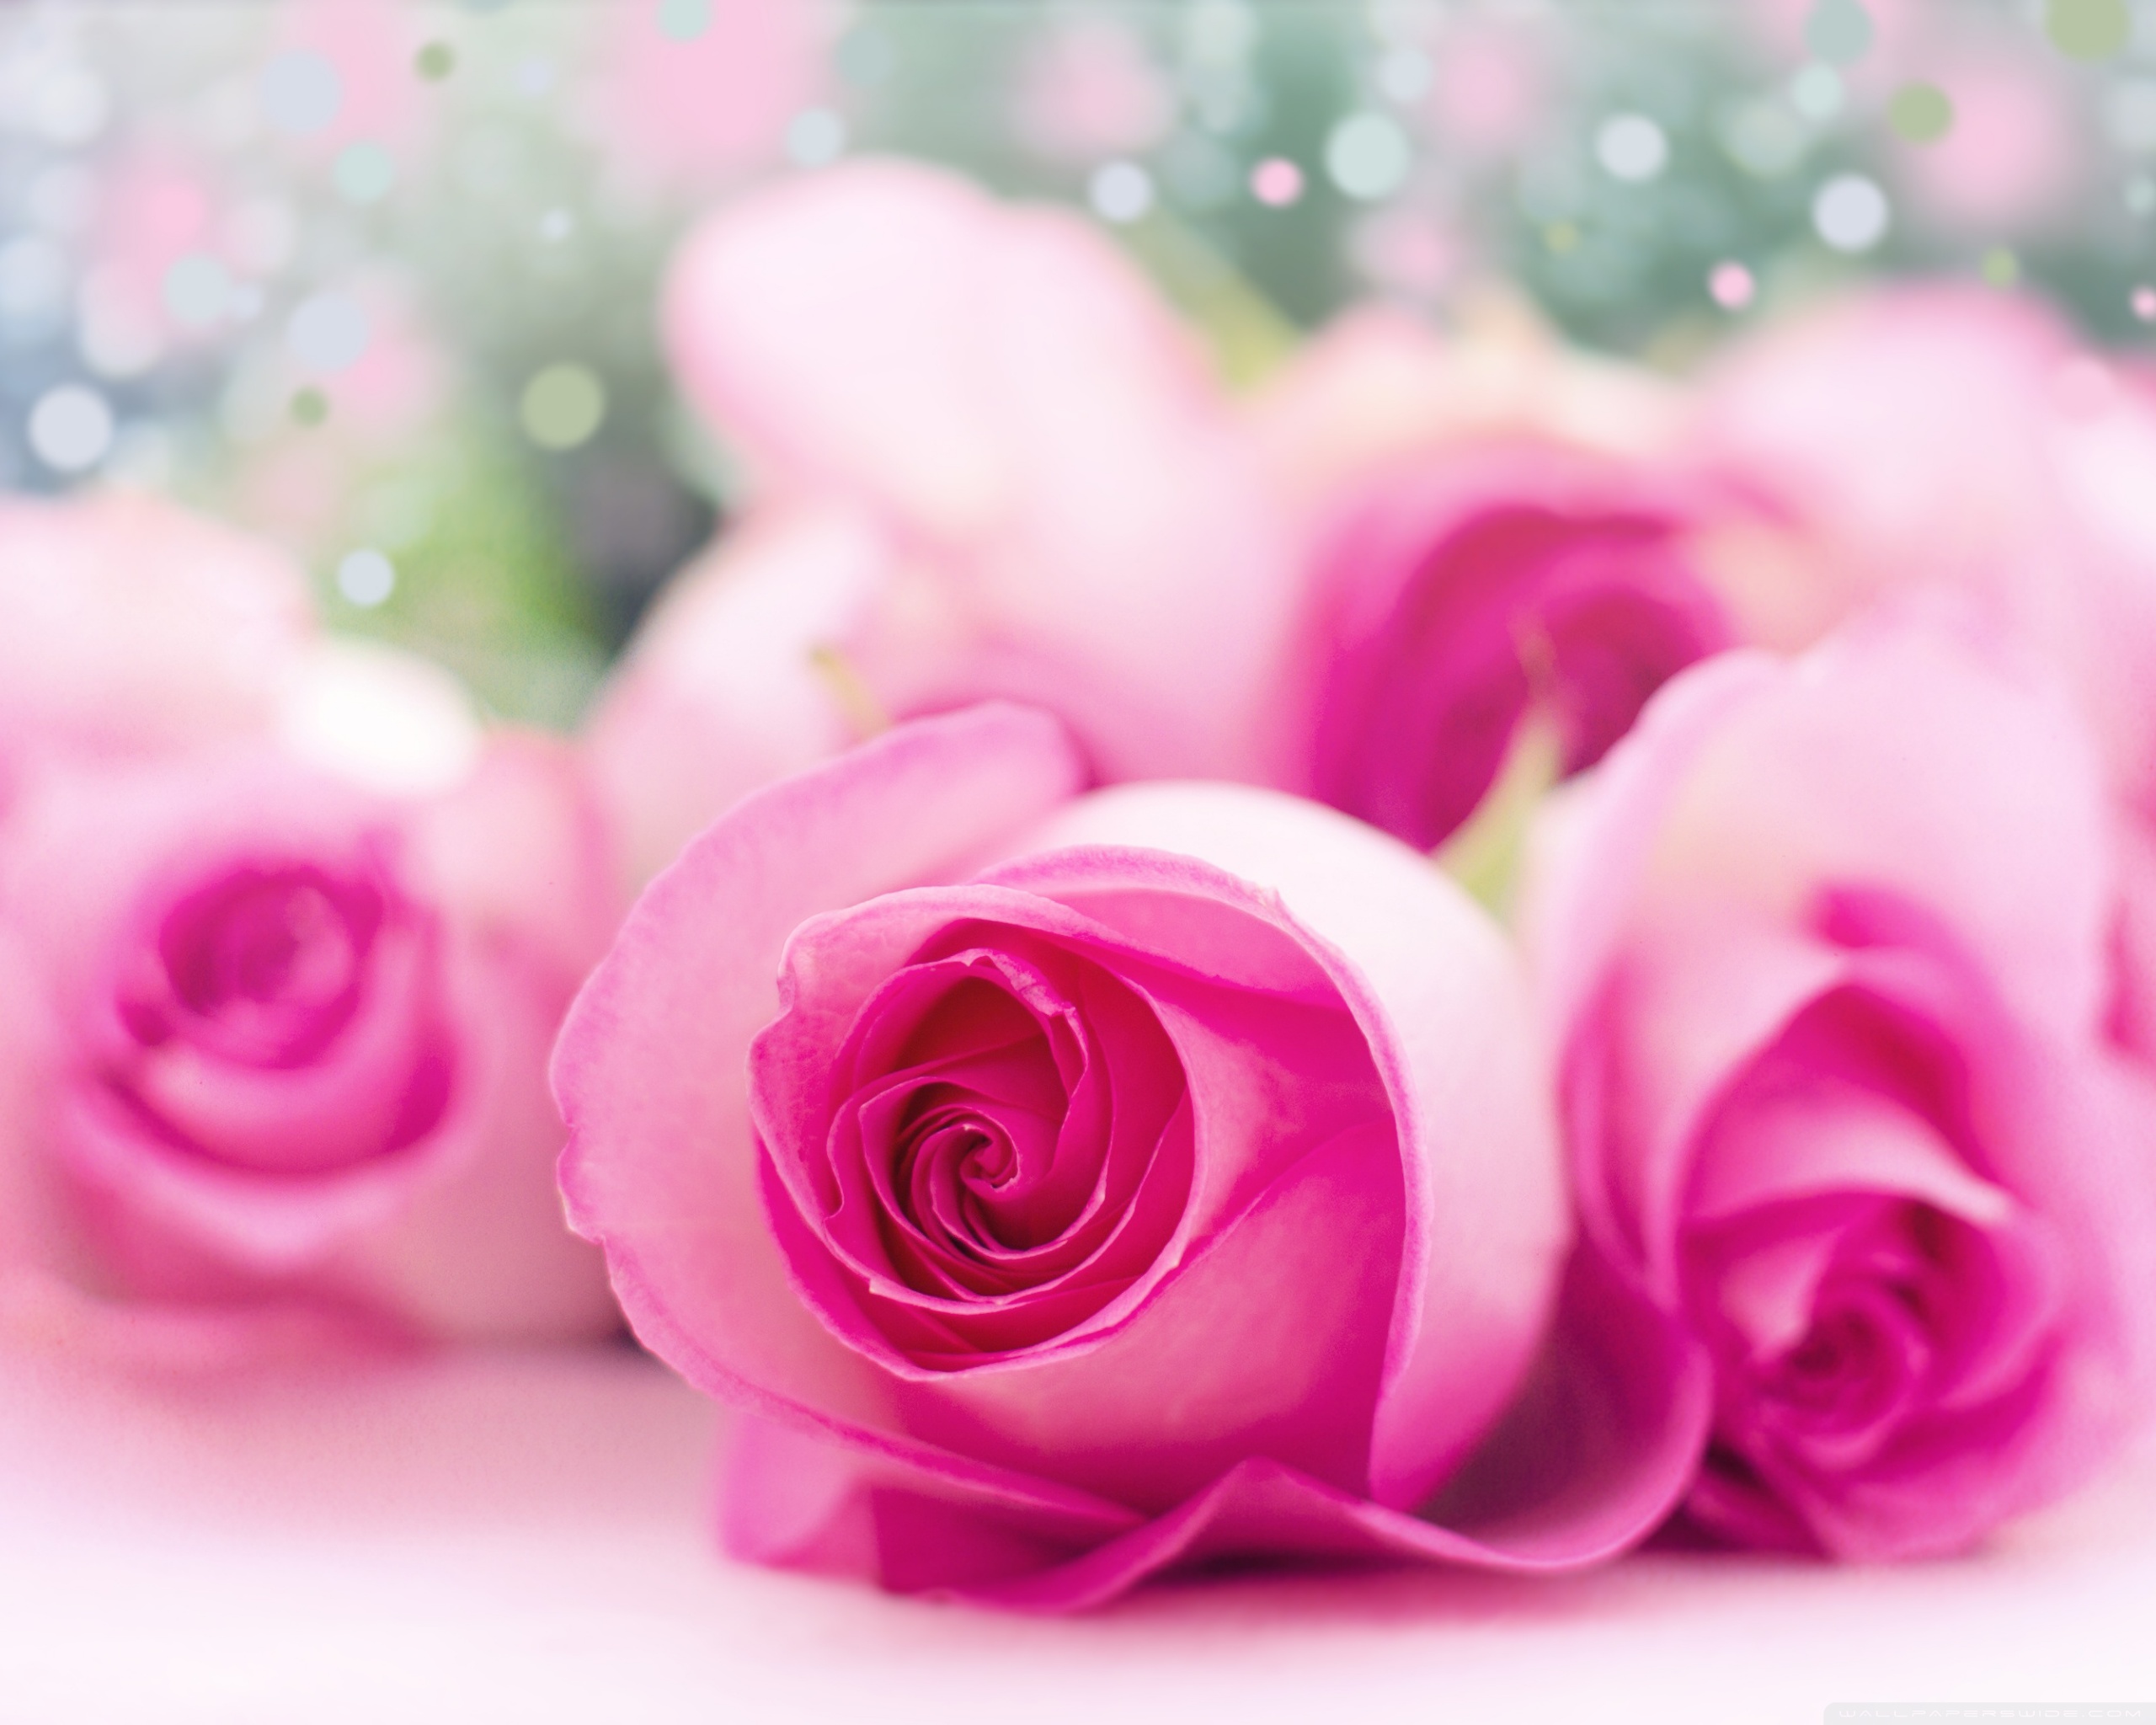 270687 flower rose blossom and bloom hd, Xiaomi Mi 9T Pro wallpaper free  download, 1080x2340 - Rare Gallery HD Wallpapers